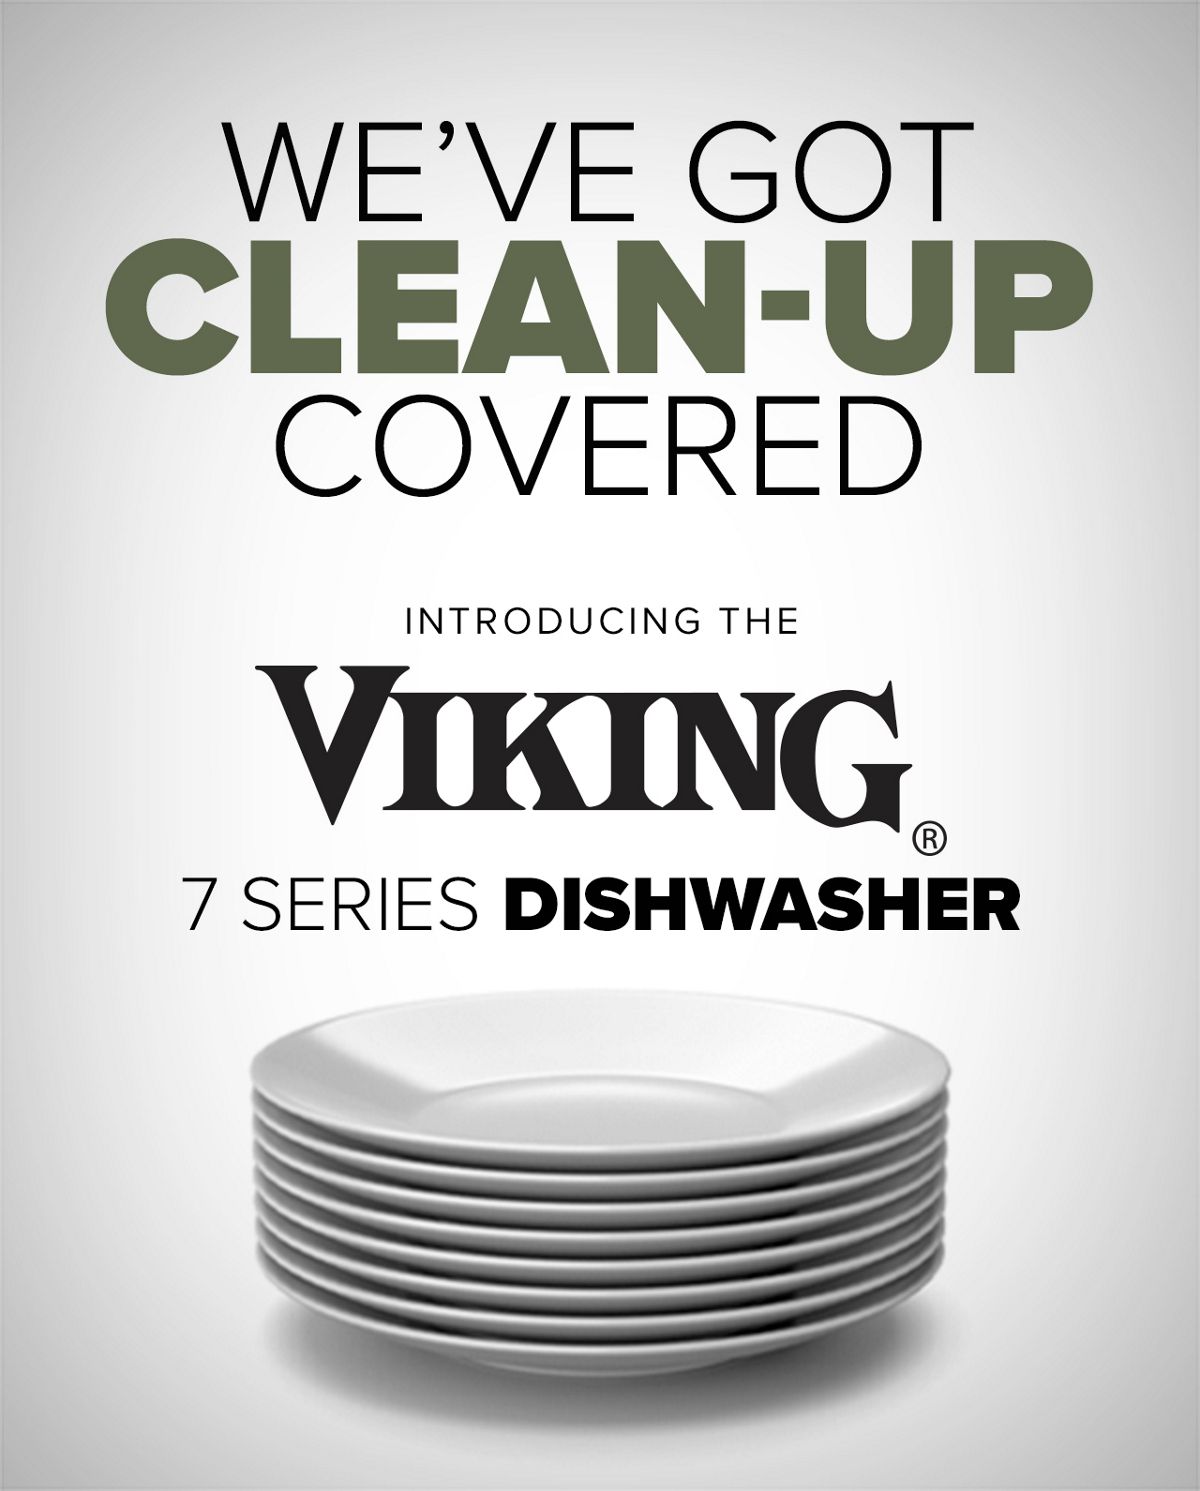 Poster for Exclusive Finishes - Viking Range, LLC